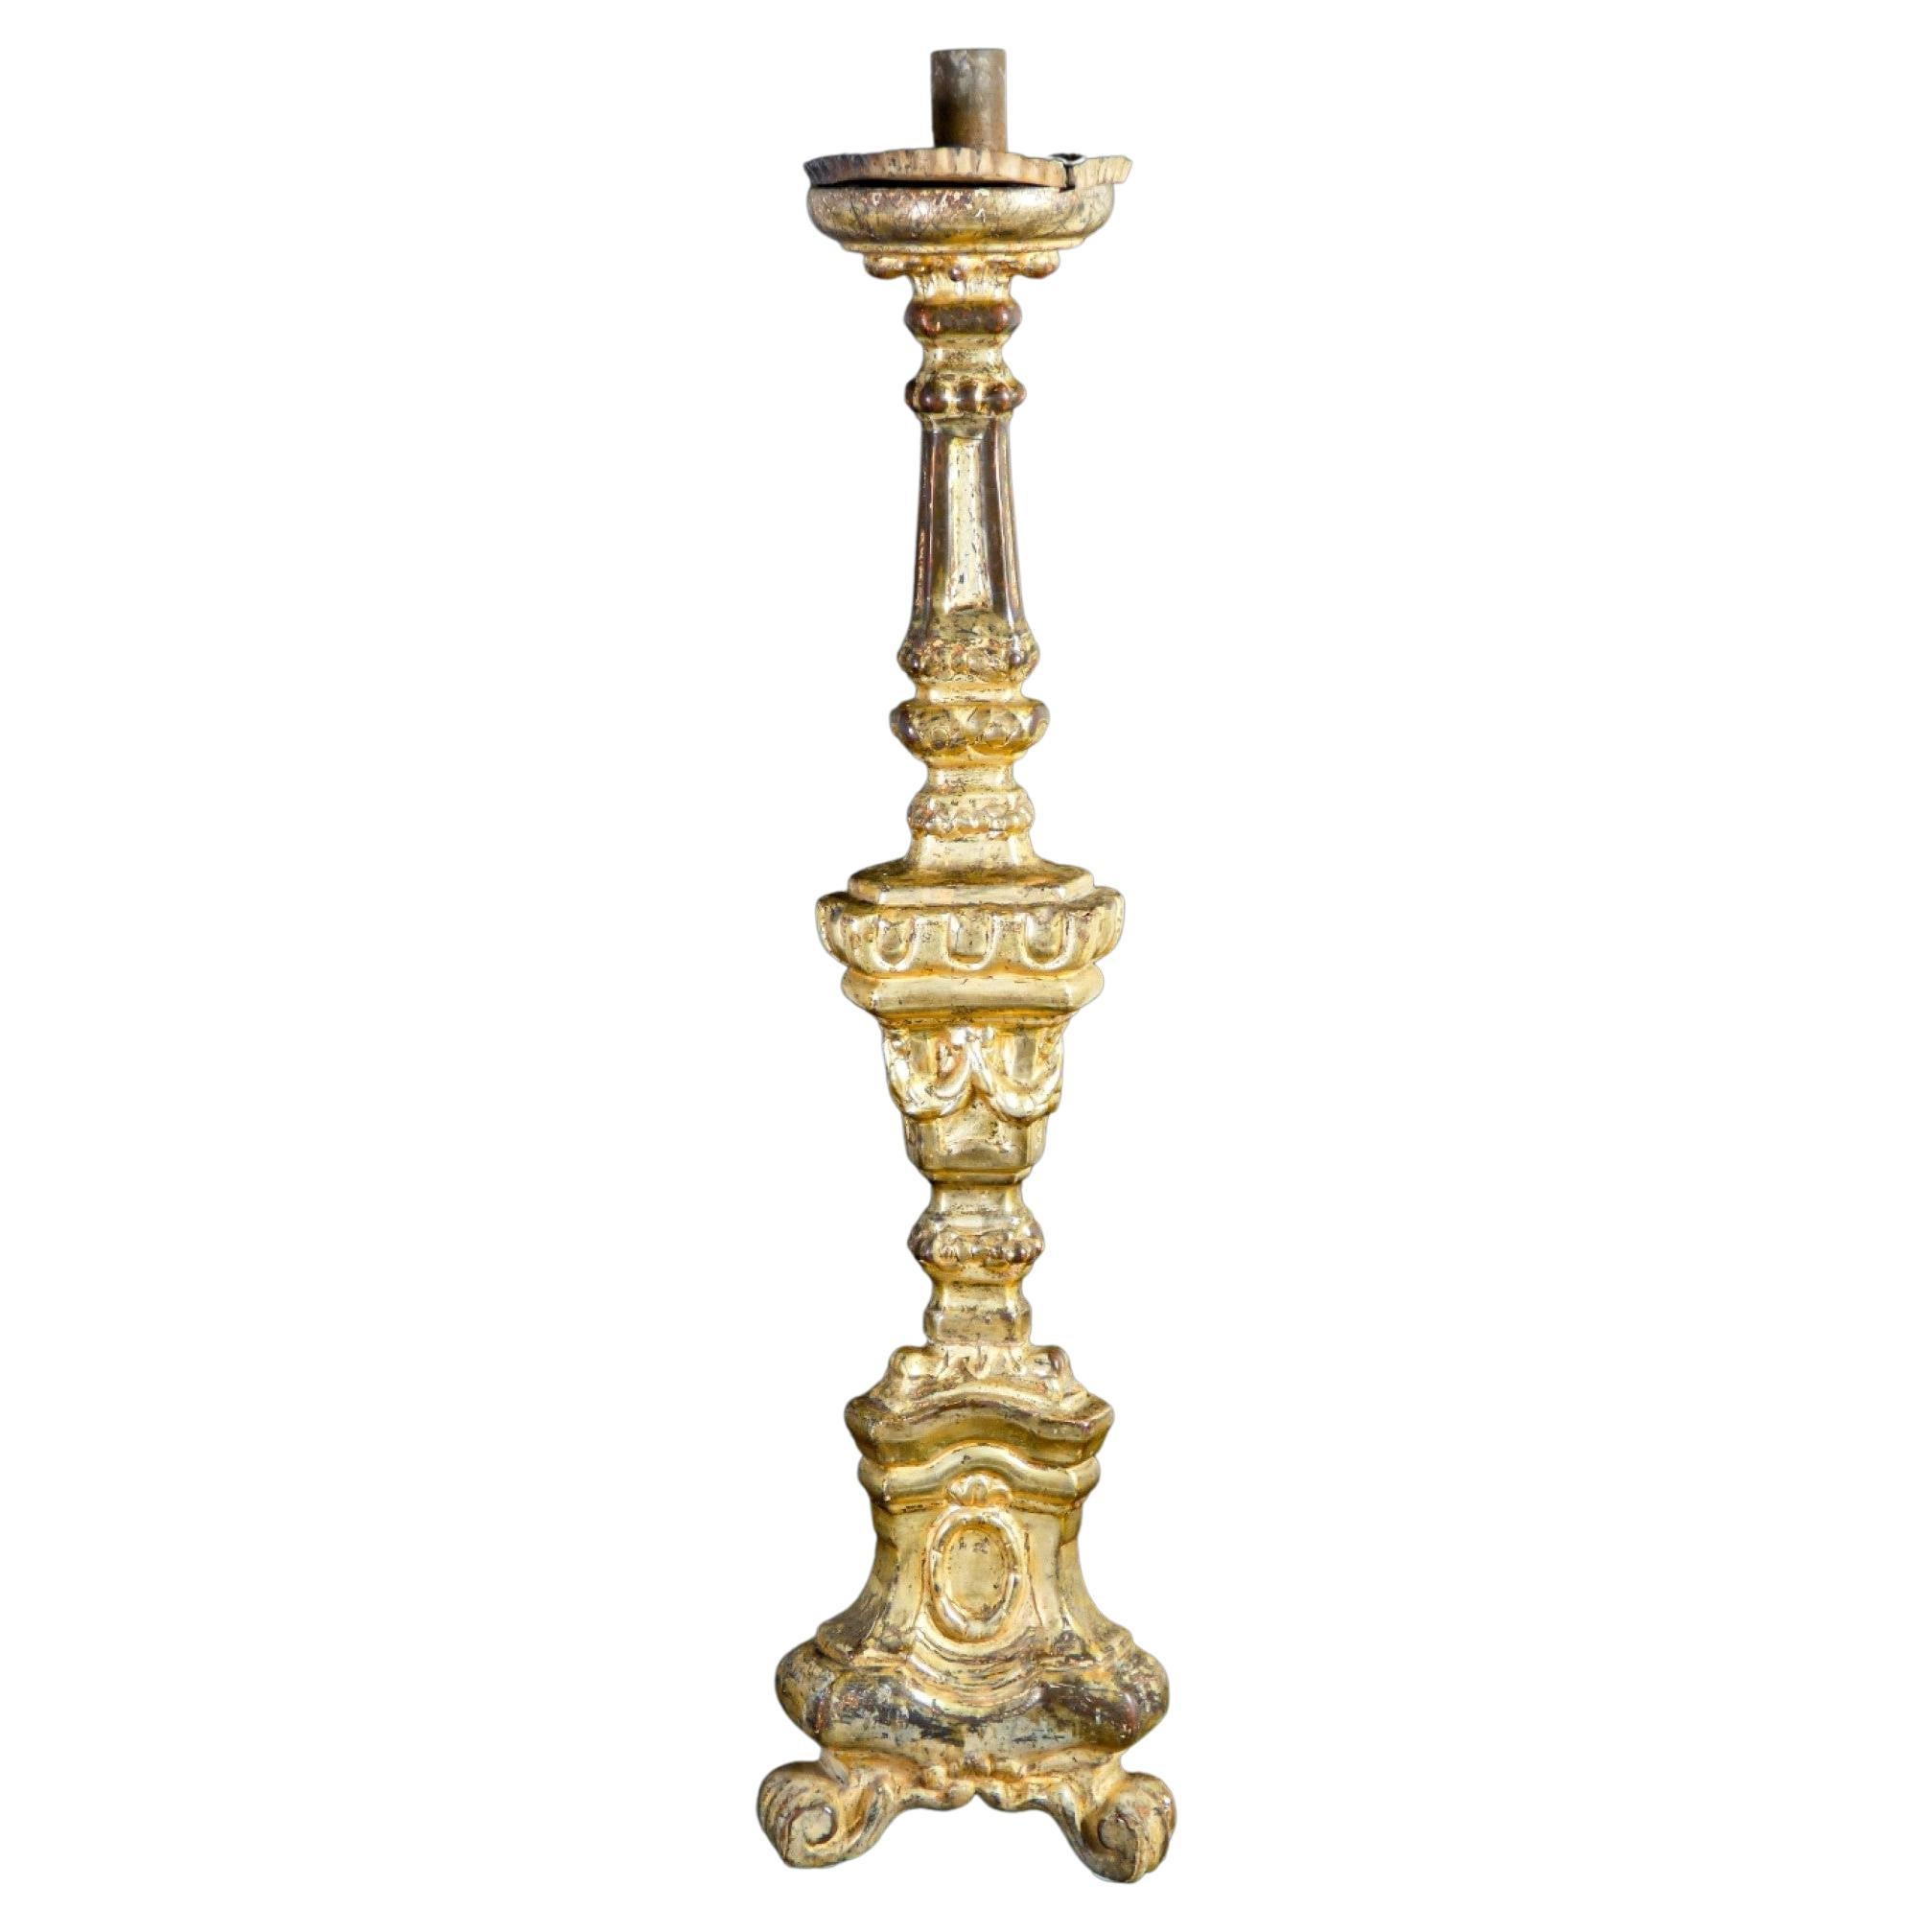 Original Louis XVI Candlestick, in Carved Wood, 'Mecca' Gilded, Italy, 1770-1780